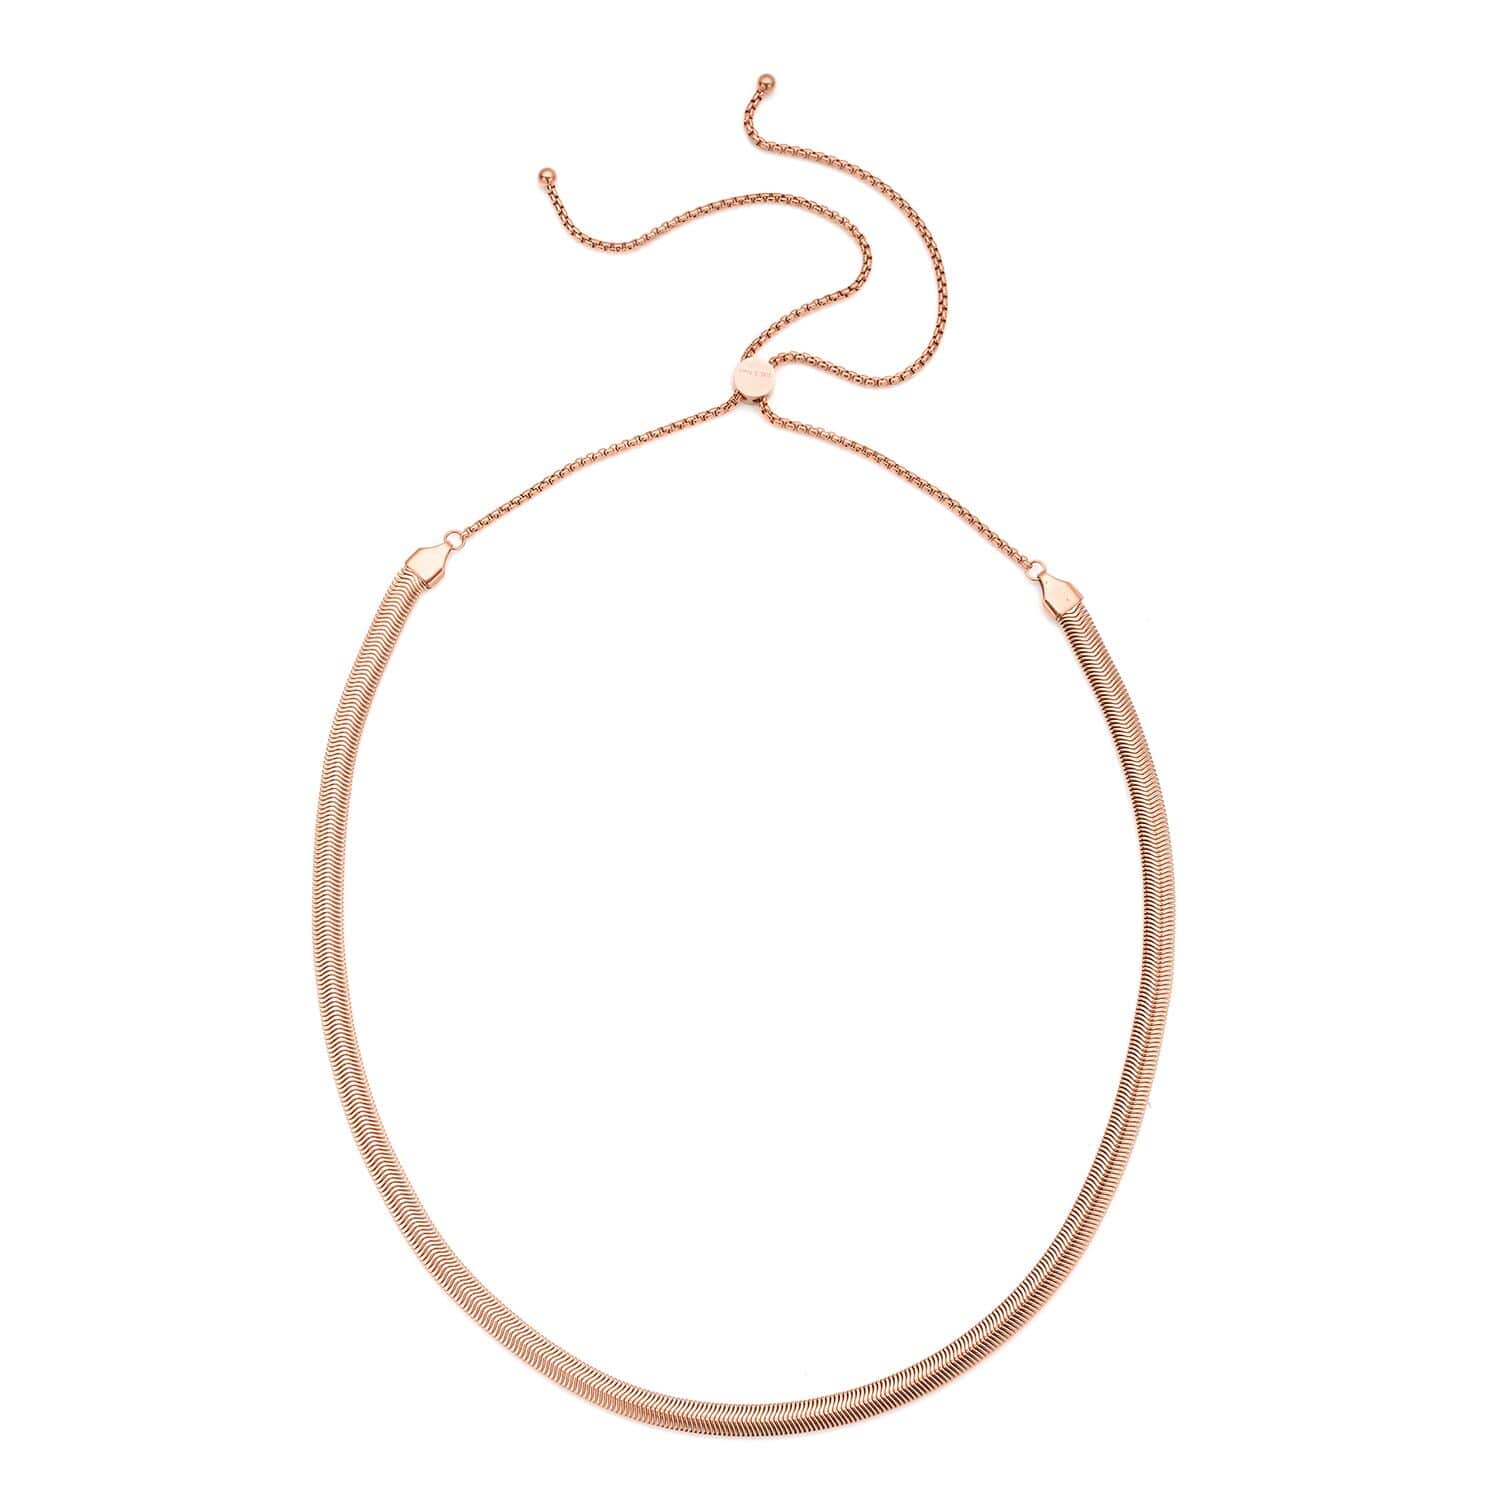 Buy Adjustable Bolo Snake Necklace in ION Plated Rose Gold